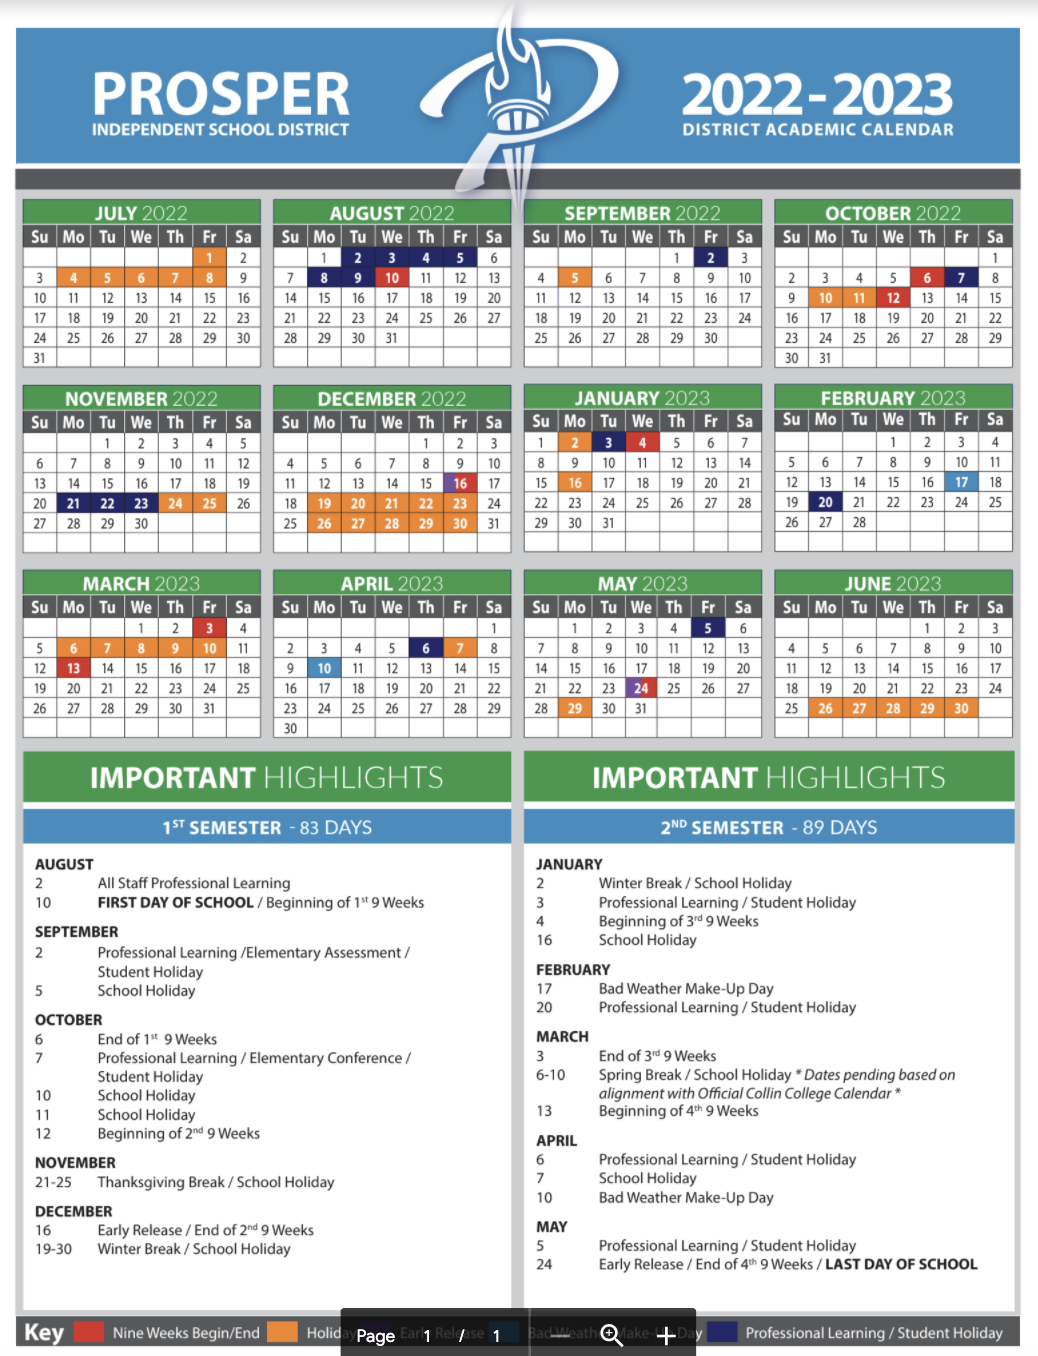 Dallas Isd 2022 23 Calendar Here Are Prosper Isd's School Calendars For The 2022-2023 And The 2023-2024  School Years | Cities | Checkoutdfw.com